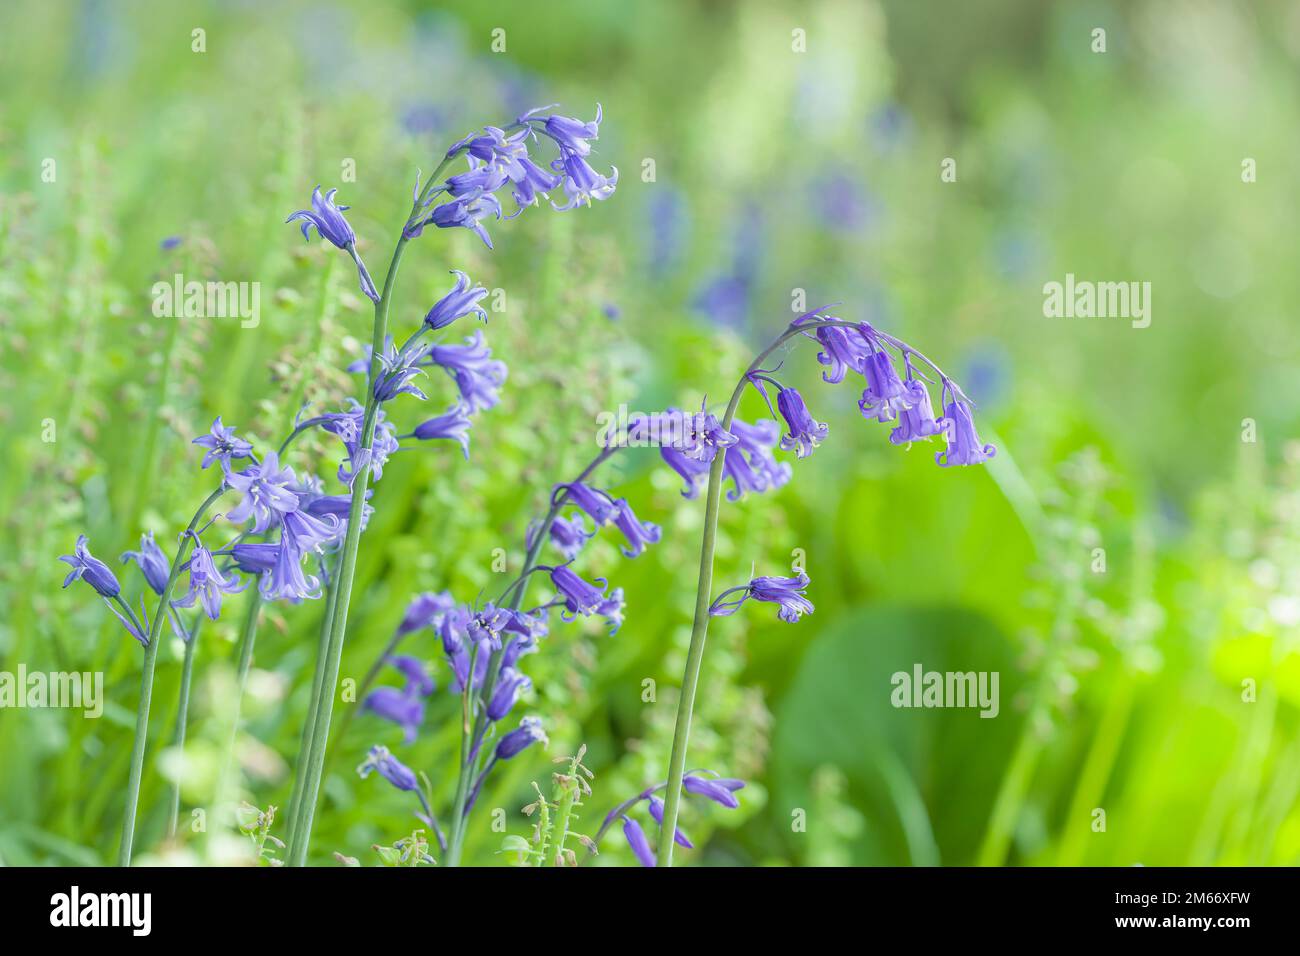 Bluebells plant, Spanish bluebells (hyacinthoides hispanica) in flower growing in woodland garden in spring, UK Stock Photo